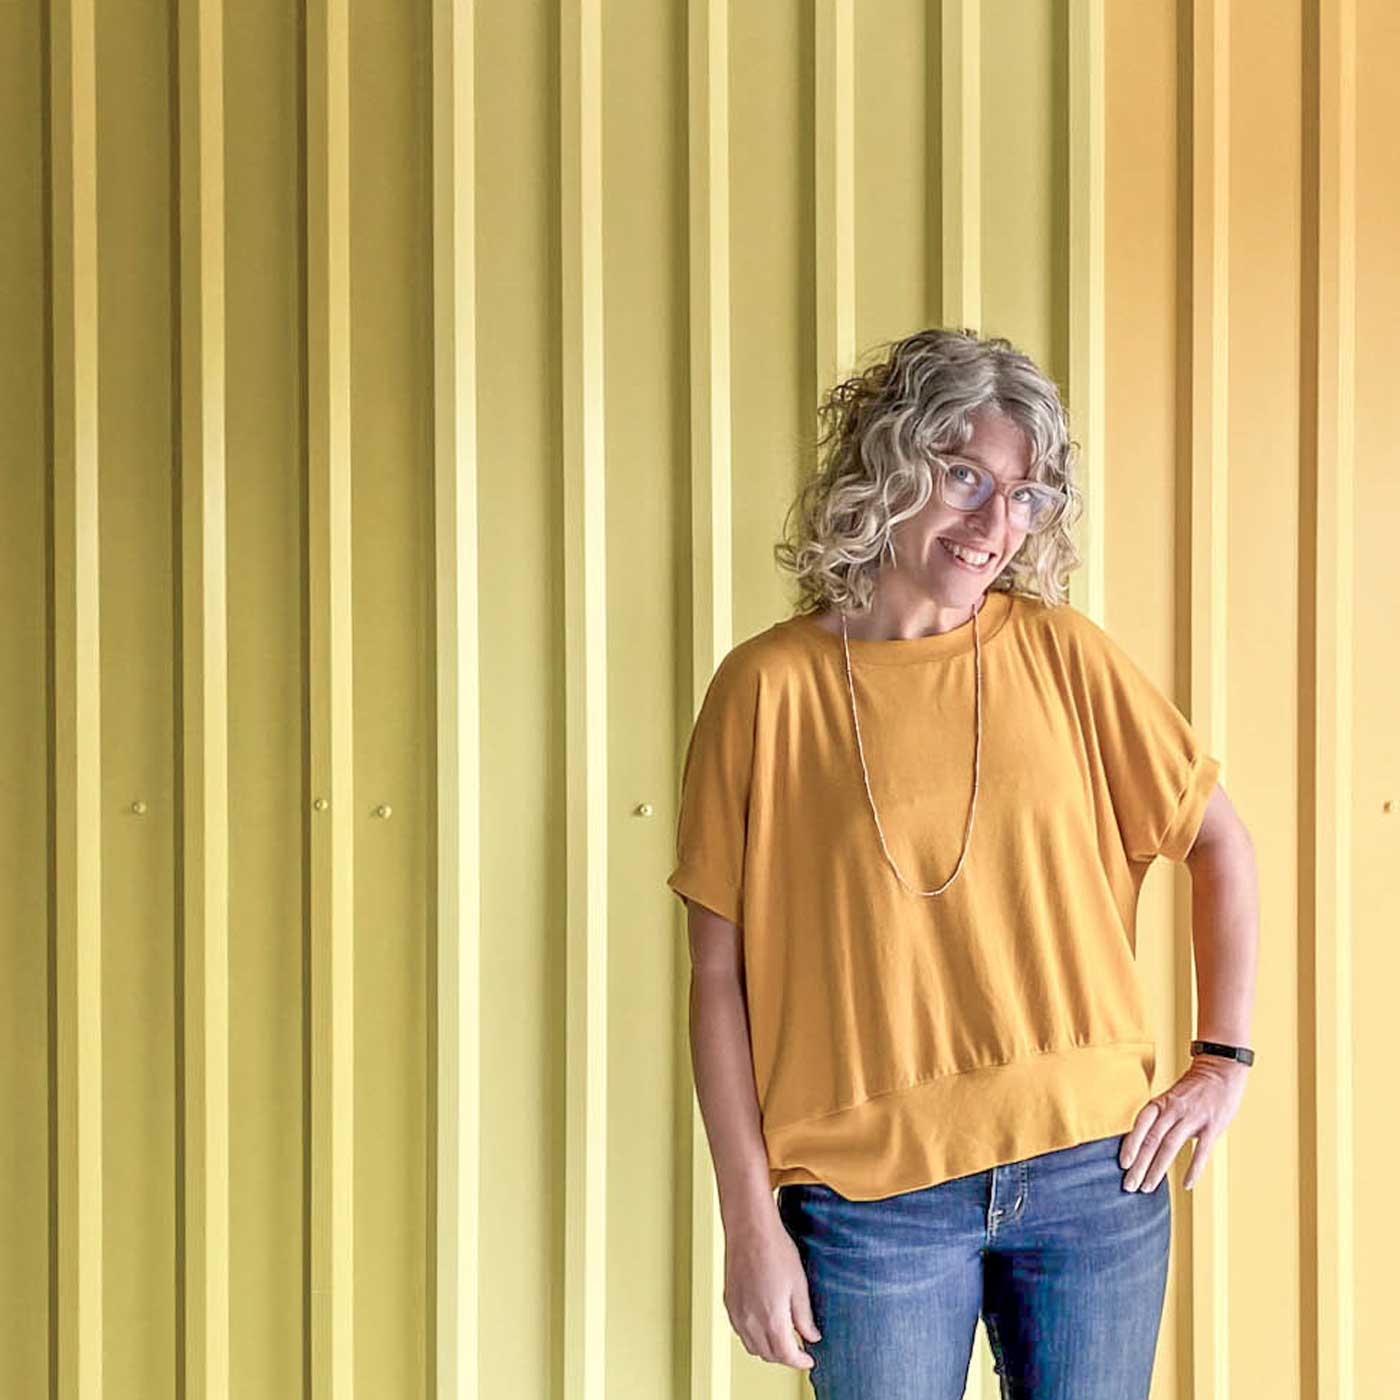 Jaime wearing a golden yellow Hosta tee standing in front of yellow ombre wall.